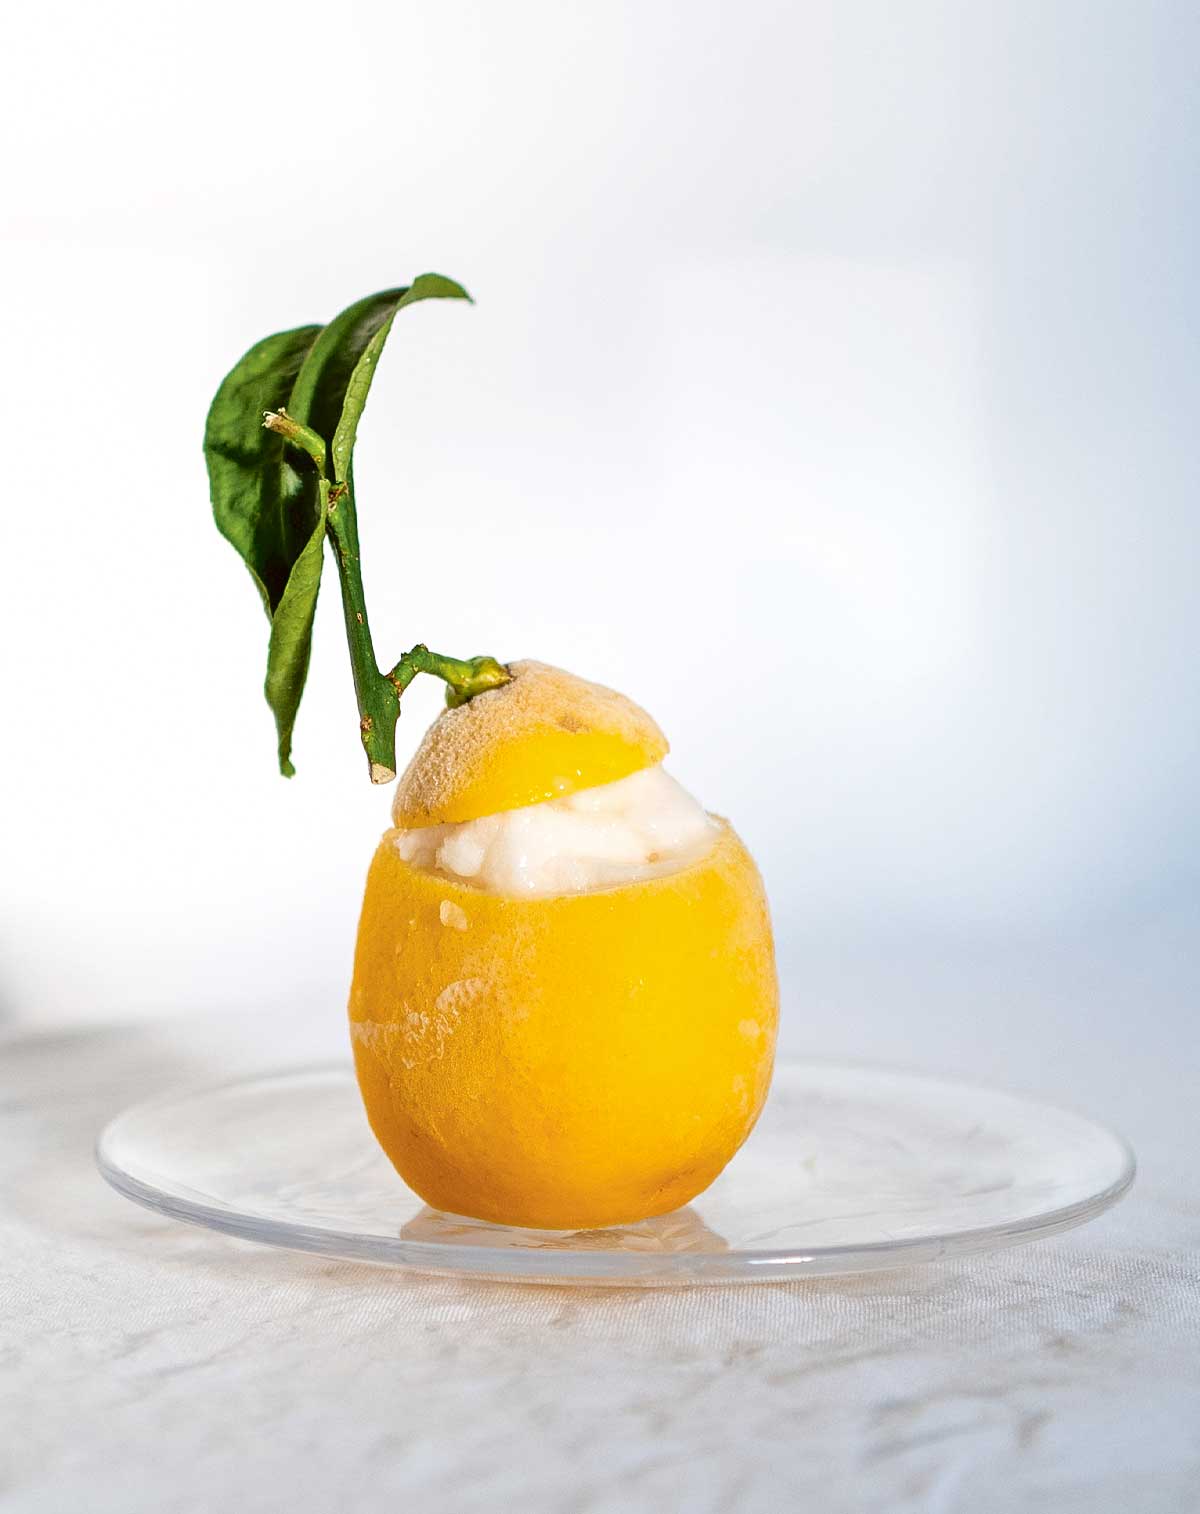 A frosty, hollowed out lemon wih leaf, filled with pale lemon sorbet on a glass plate.